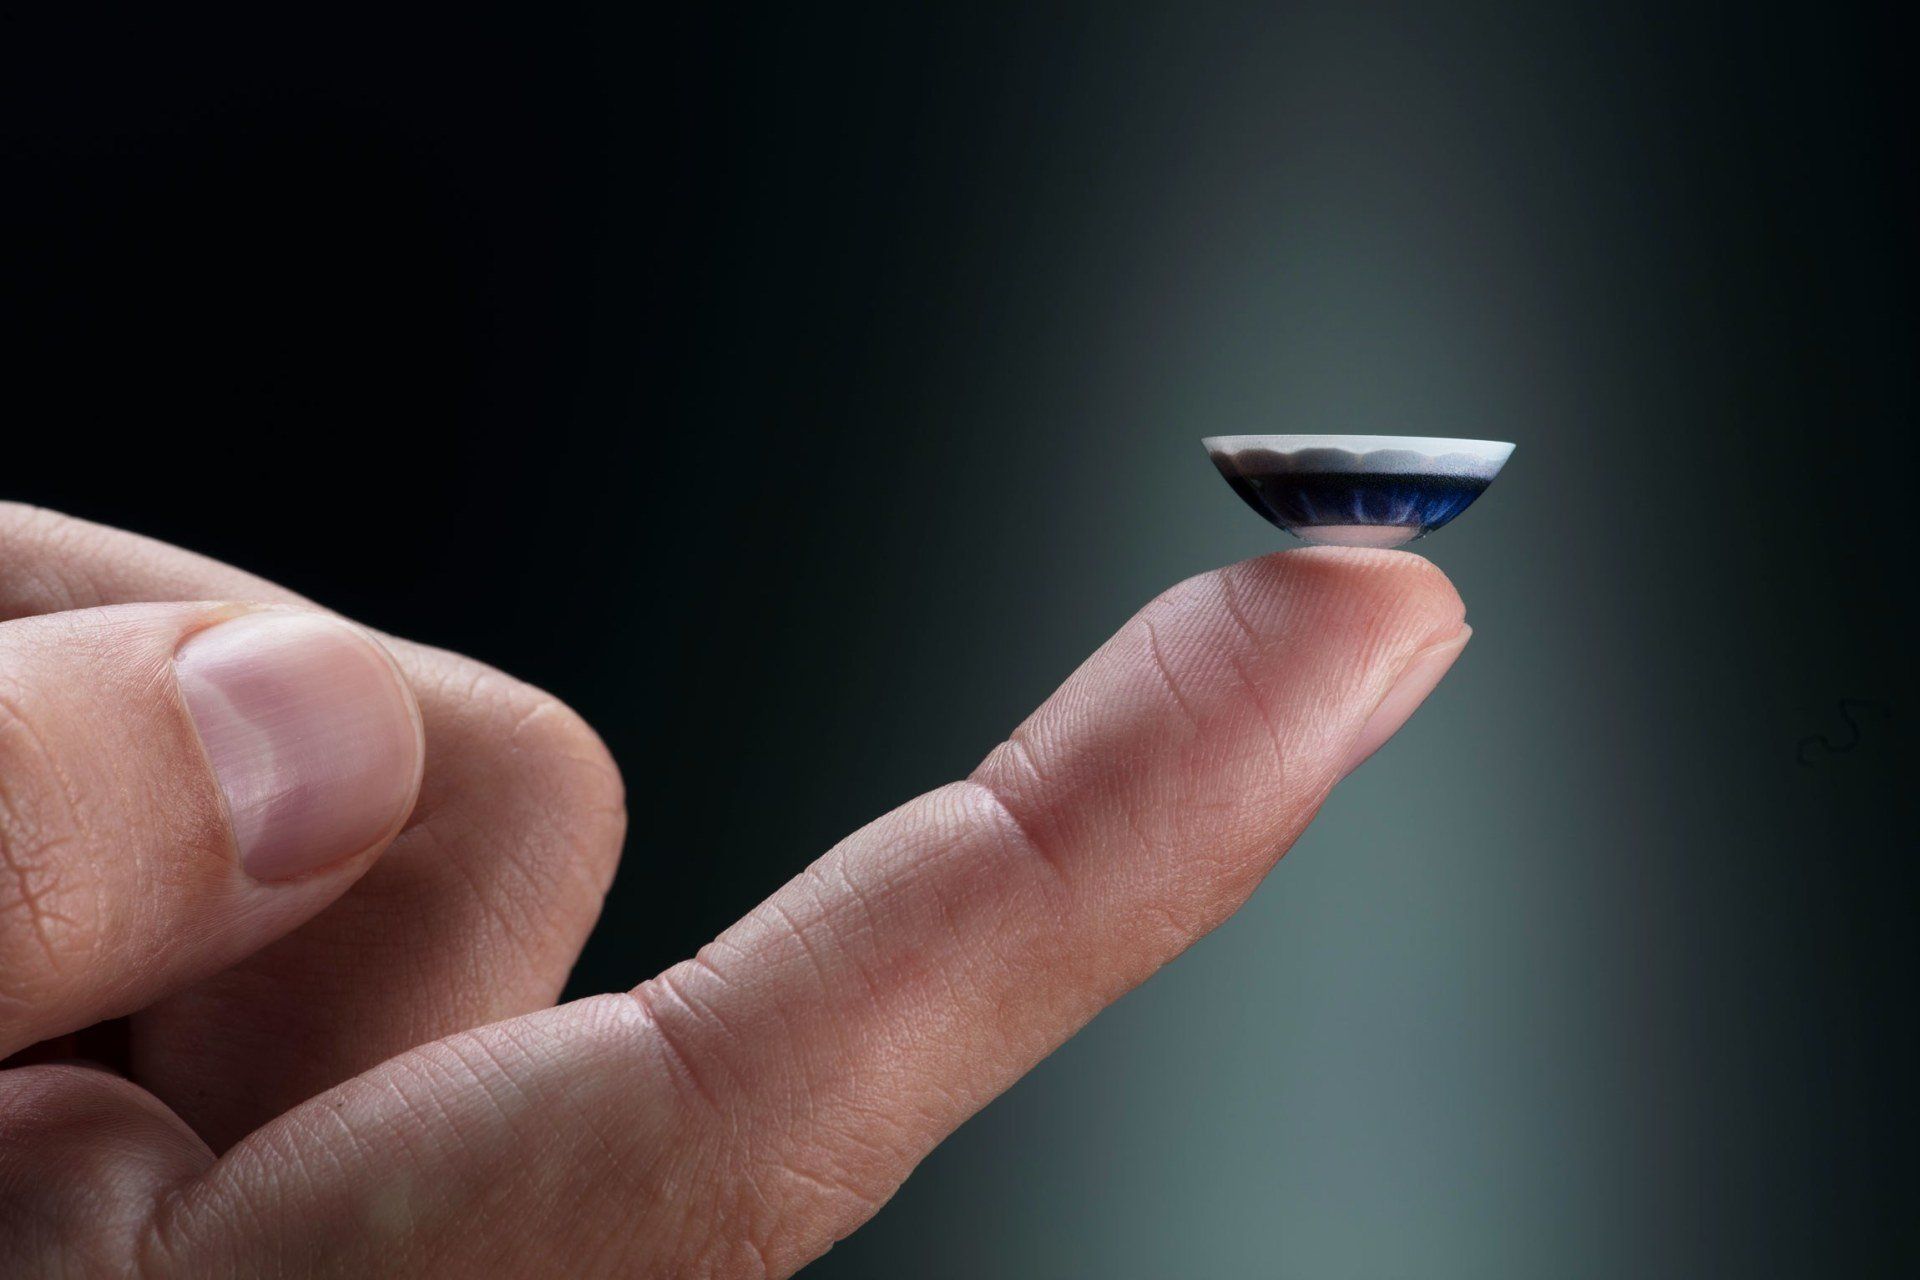 First True Smart Contact Lens: Mojo Vision sets world record